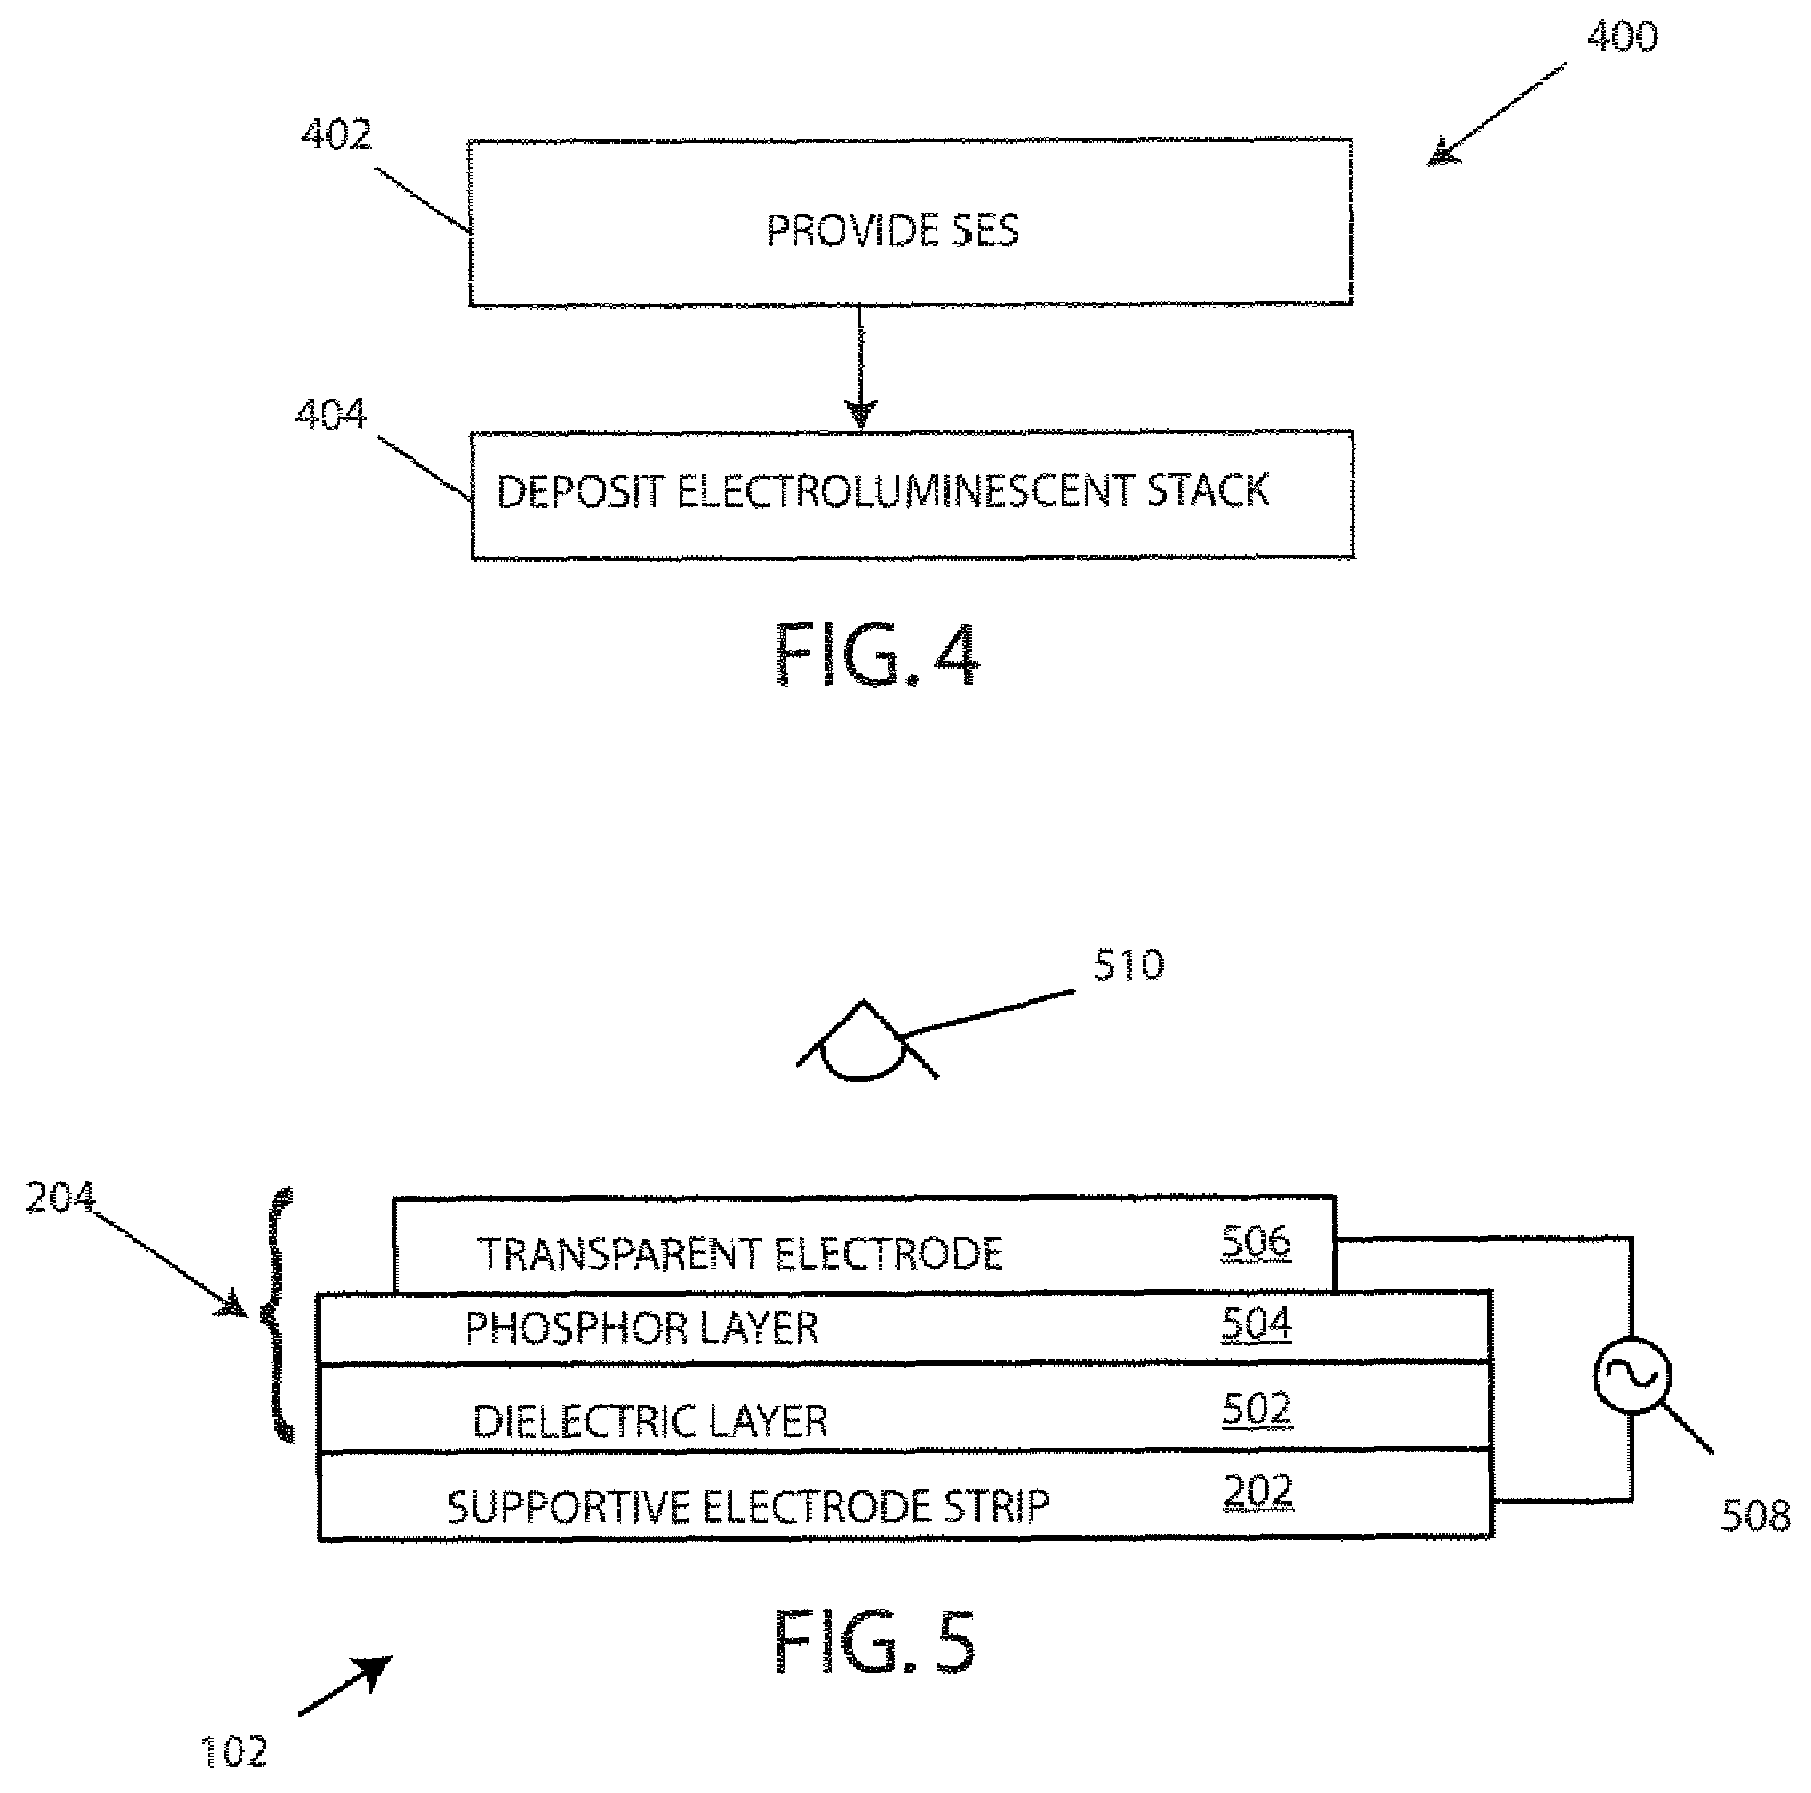 Electroluminescent Display Apparatus and Methods